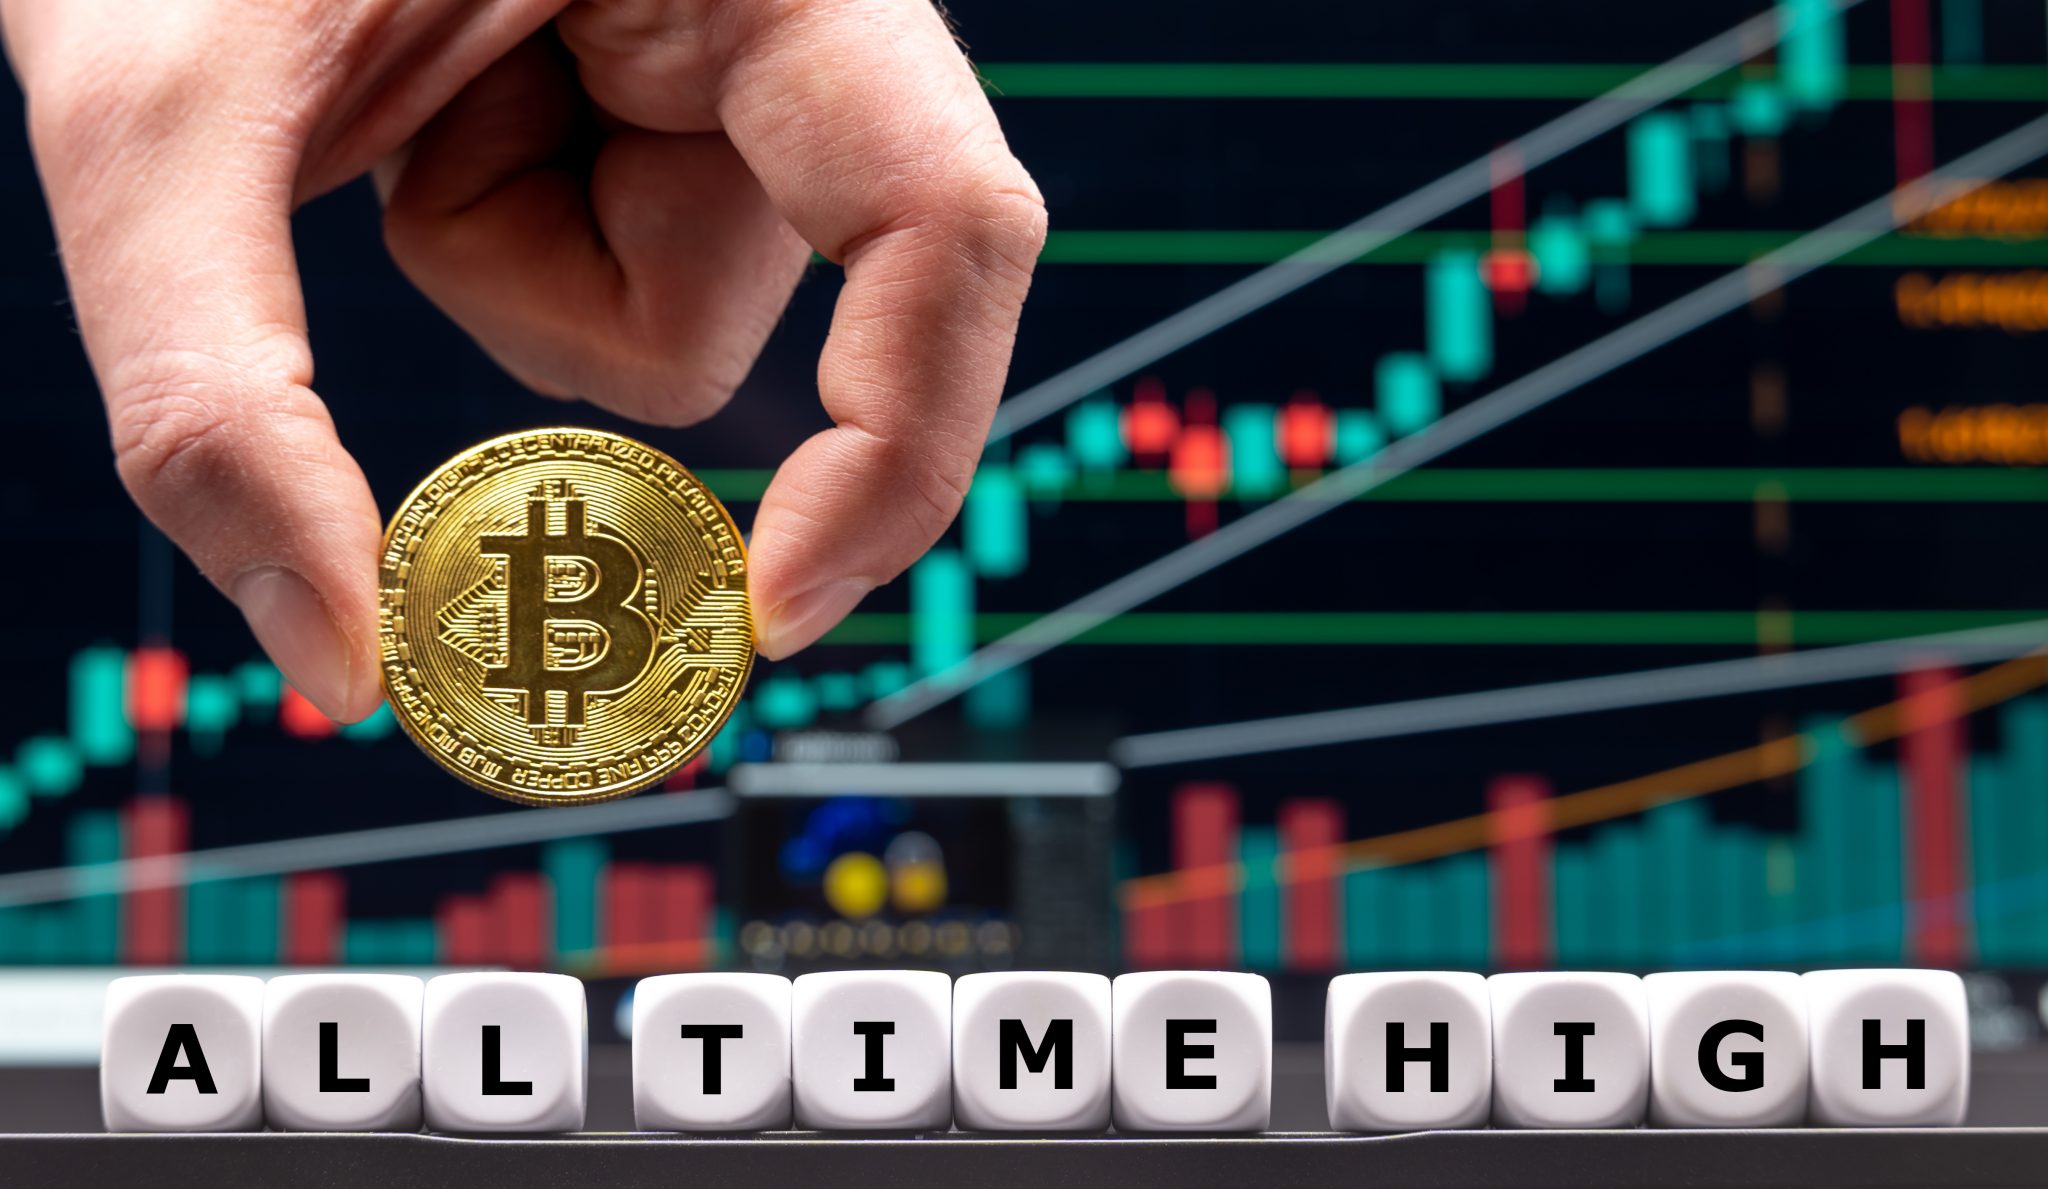 Bitcoin coin limit famous mathematic crypto